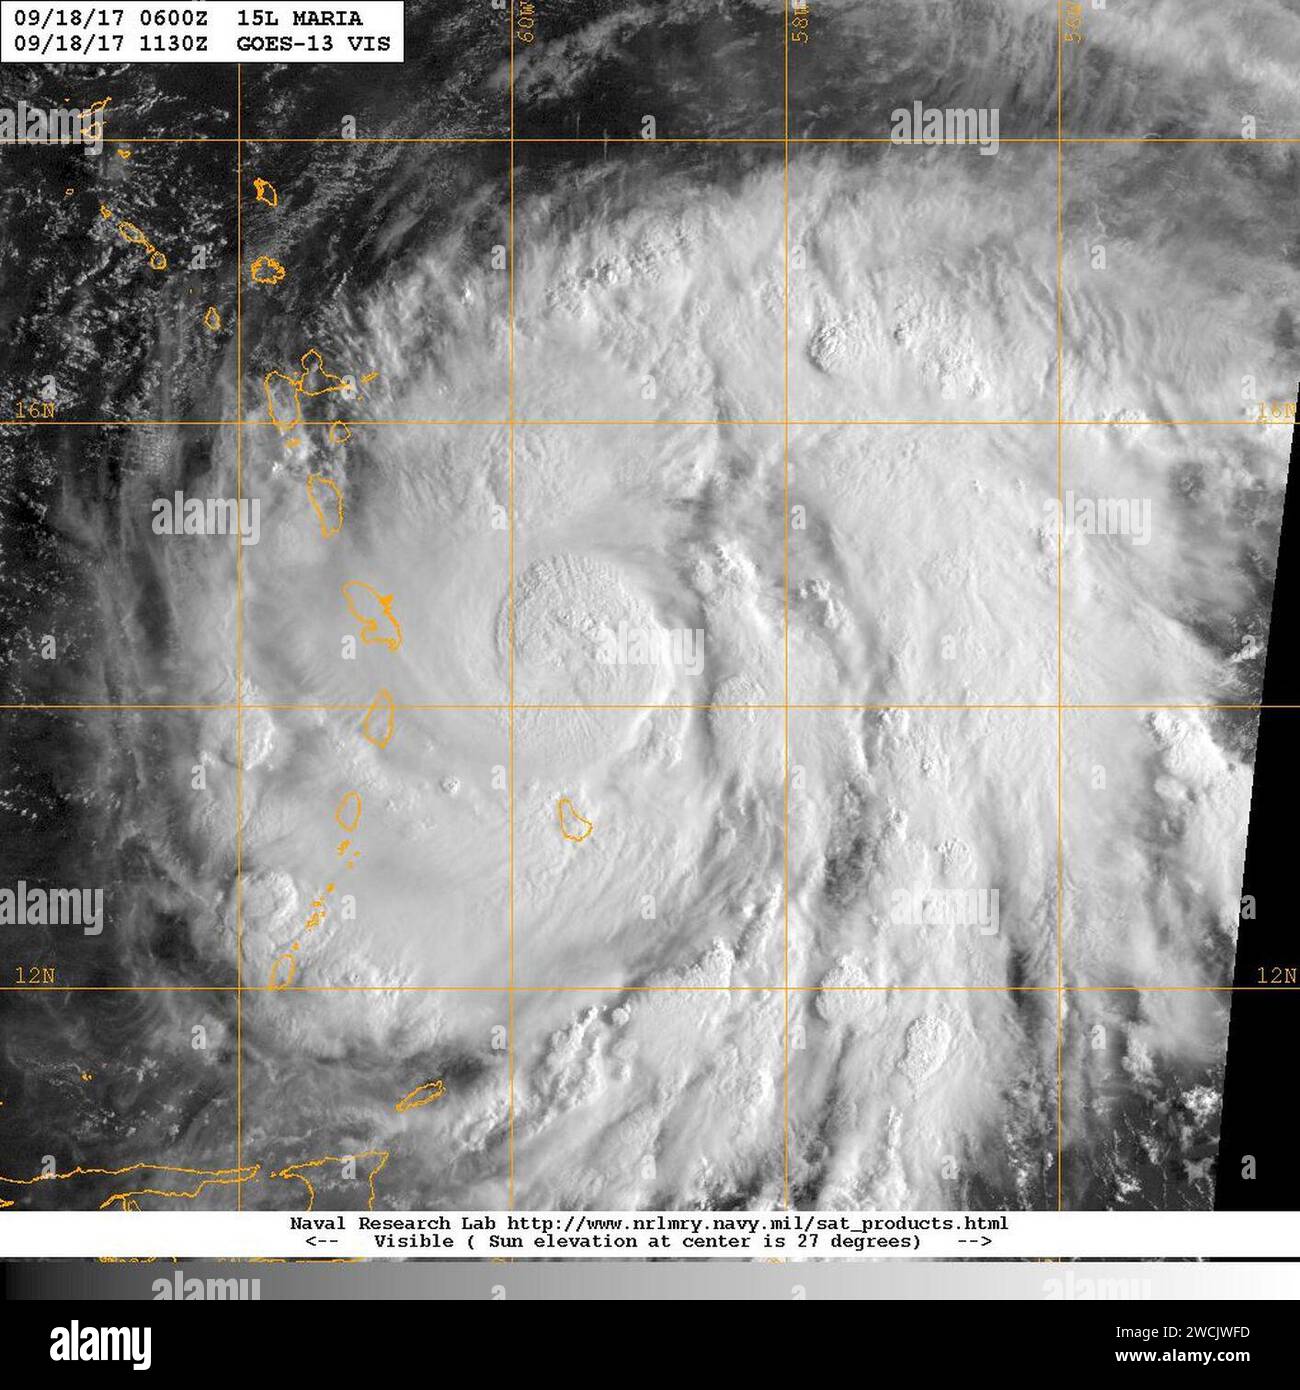 Hurricane Lee about the size of Montana. Idalia was as wide as